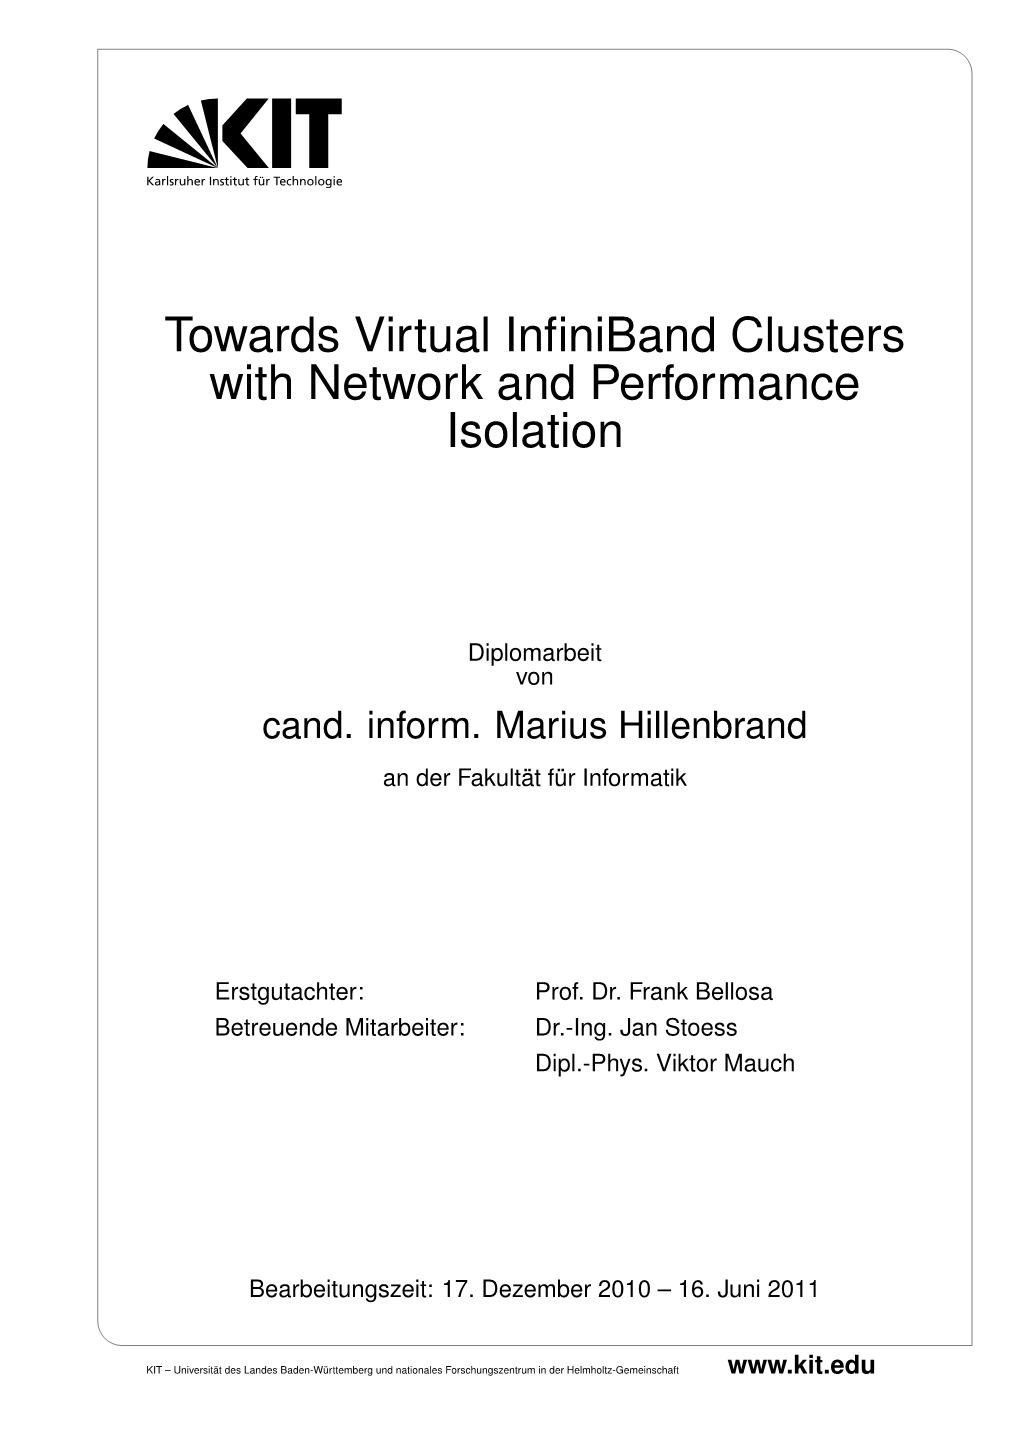 Towards Virtual Infiniband Clusters with Network and Performance